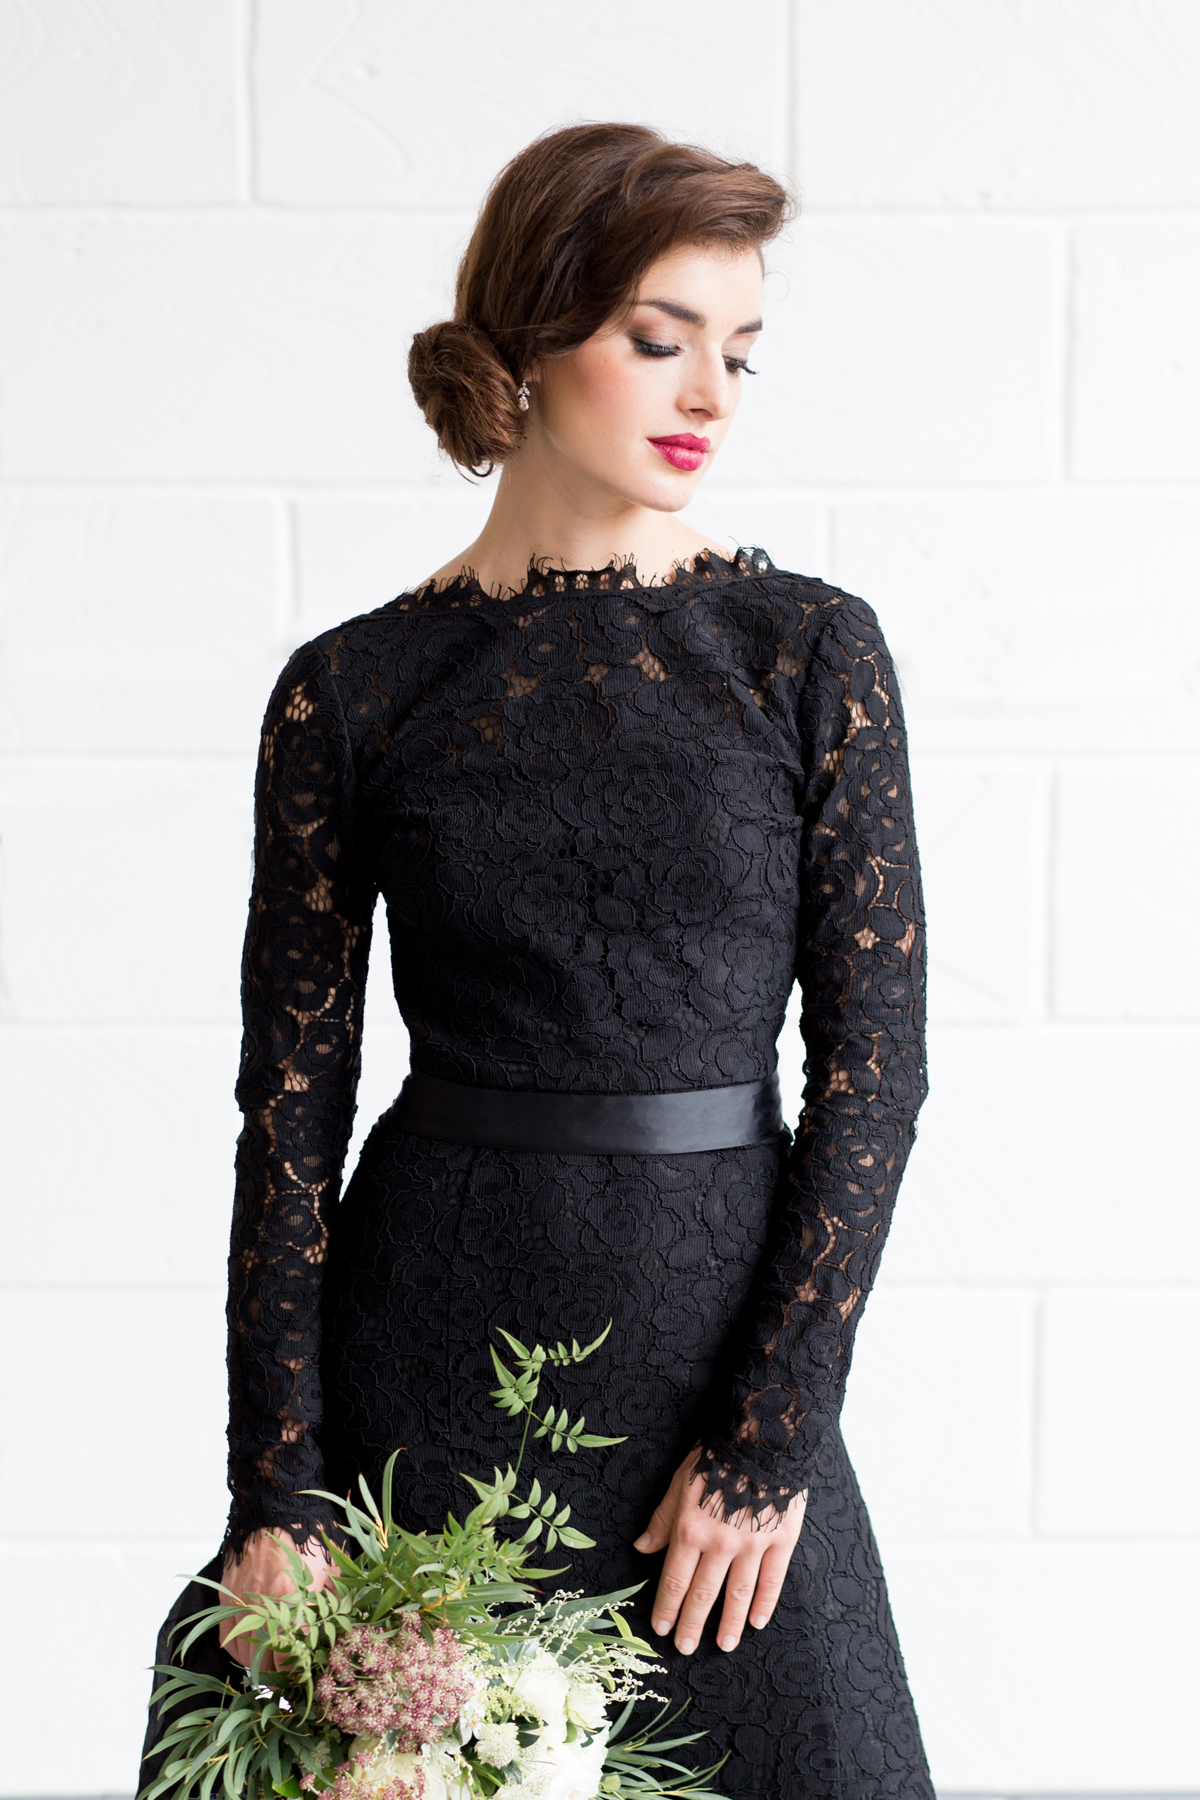 Bridesmaid in Black Lace Sleeve Gown